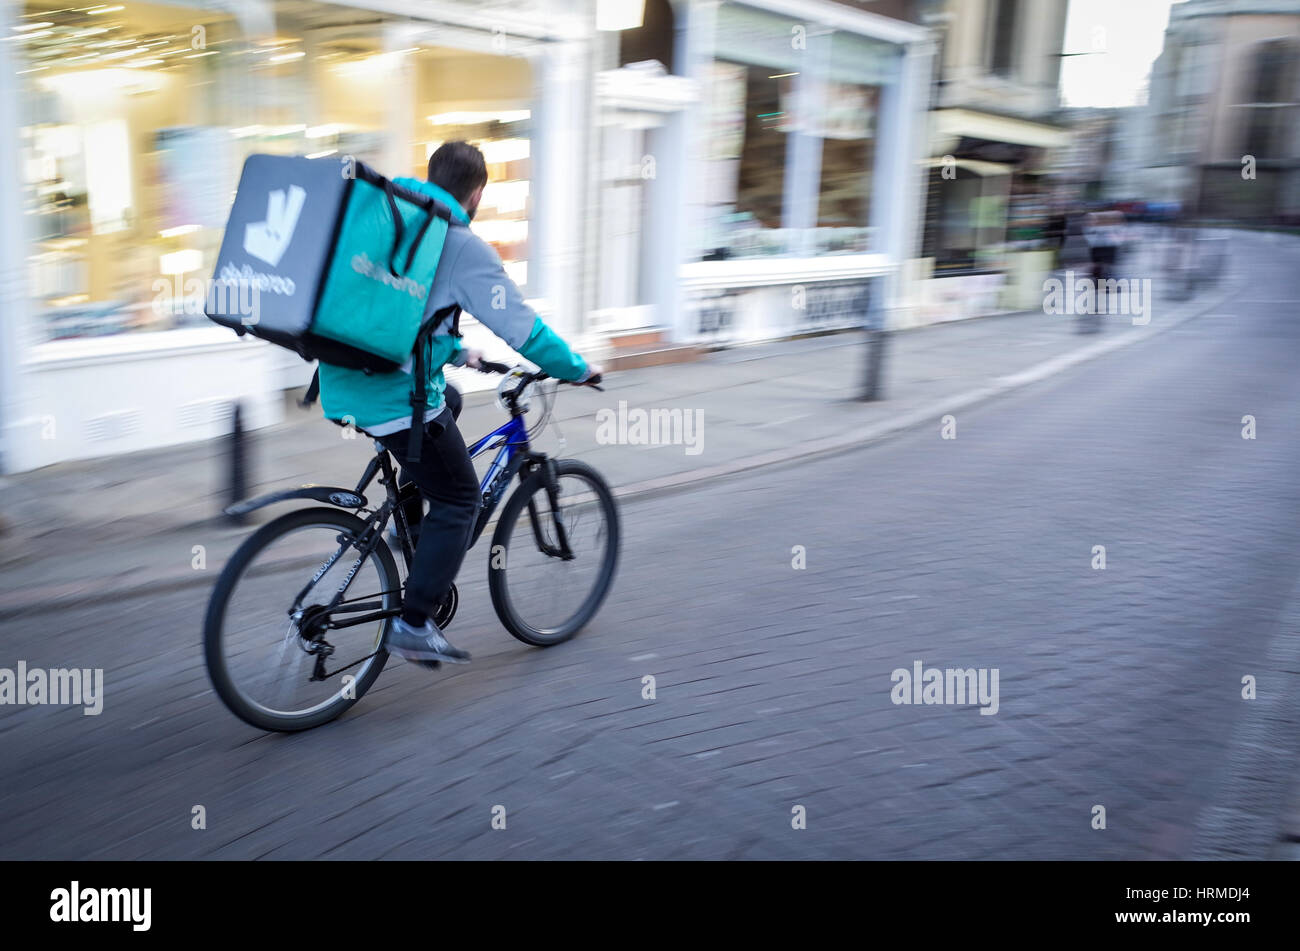 A Deliveroo food delivery courier rushes through central Cambridge UK Stock Photo